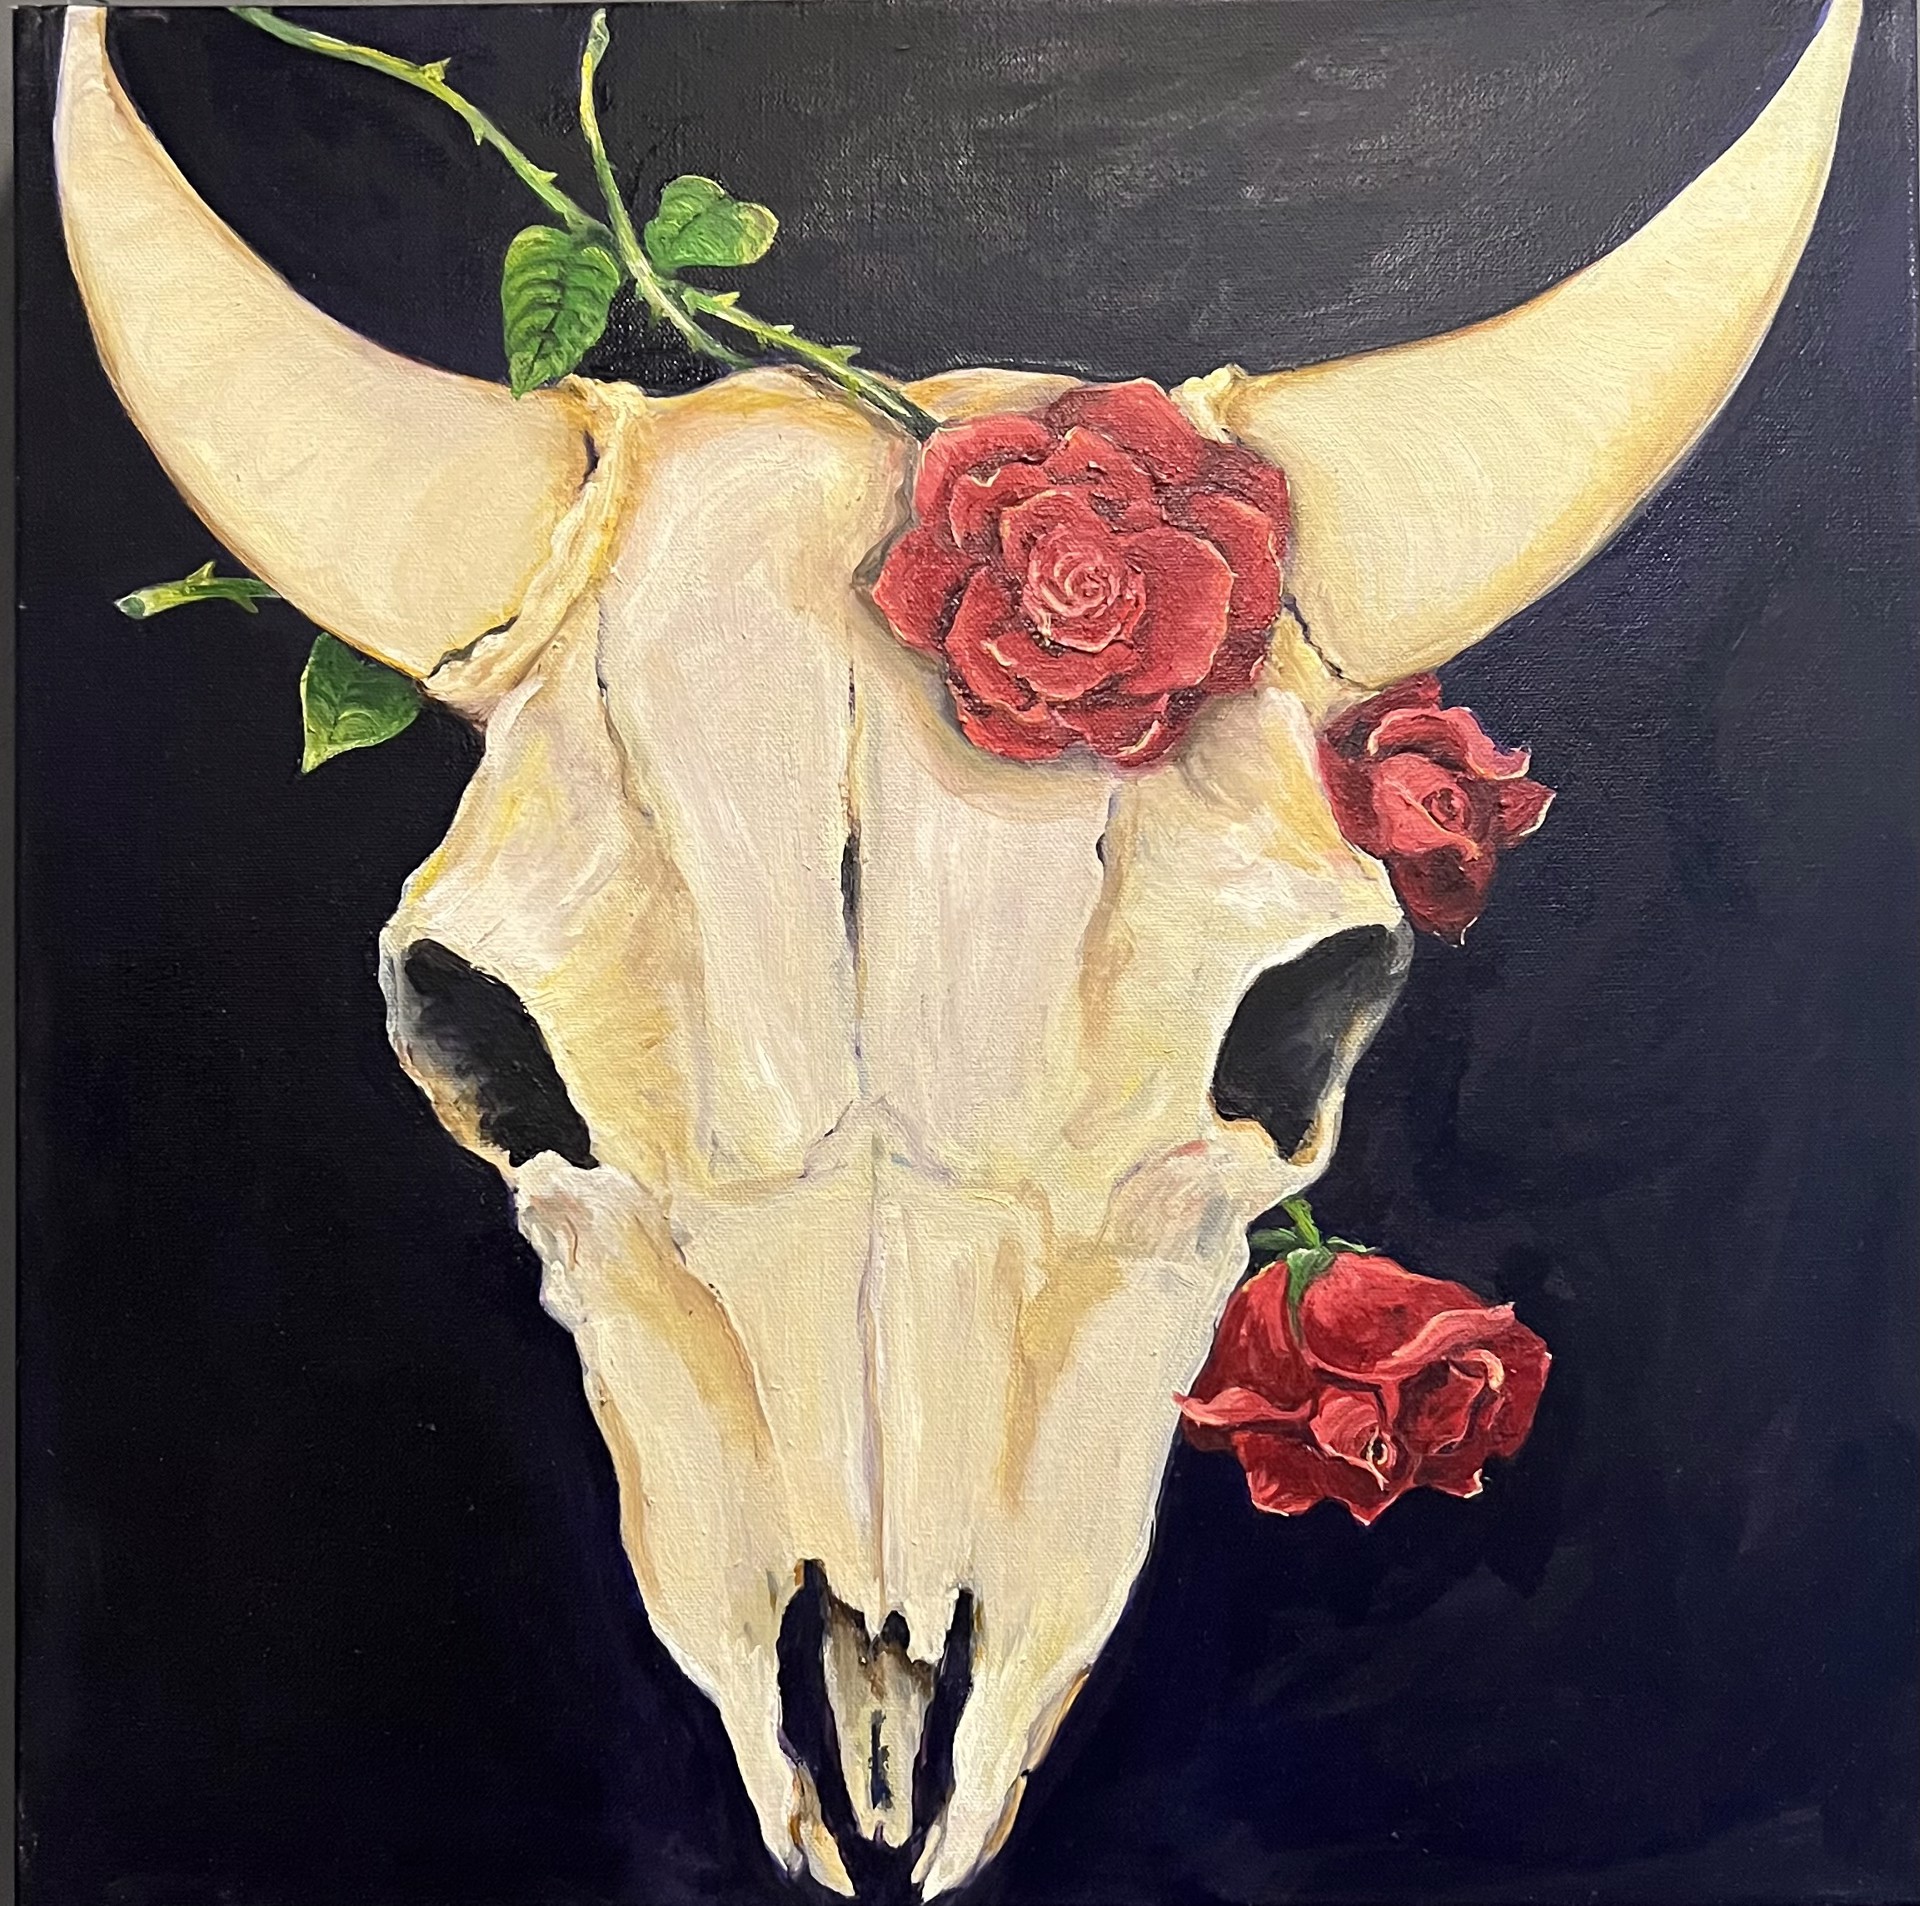 Bones and Roses  (Skull) by Stacey Harms